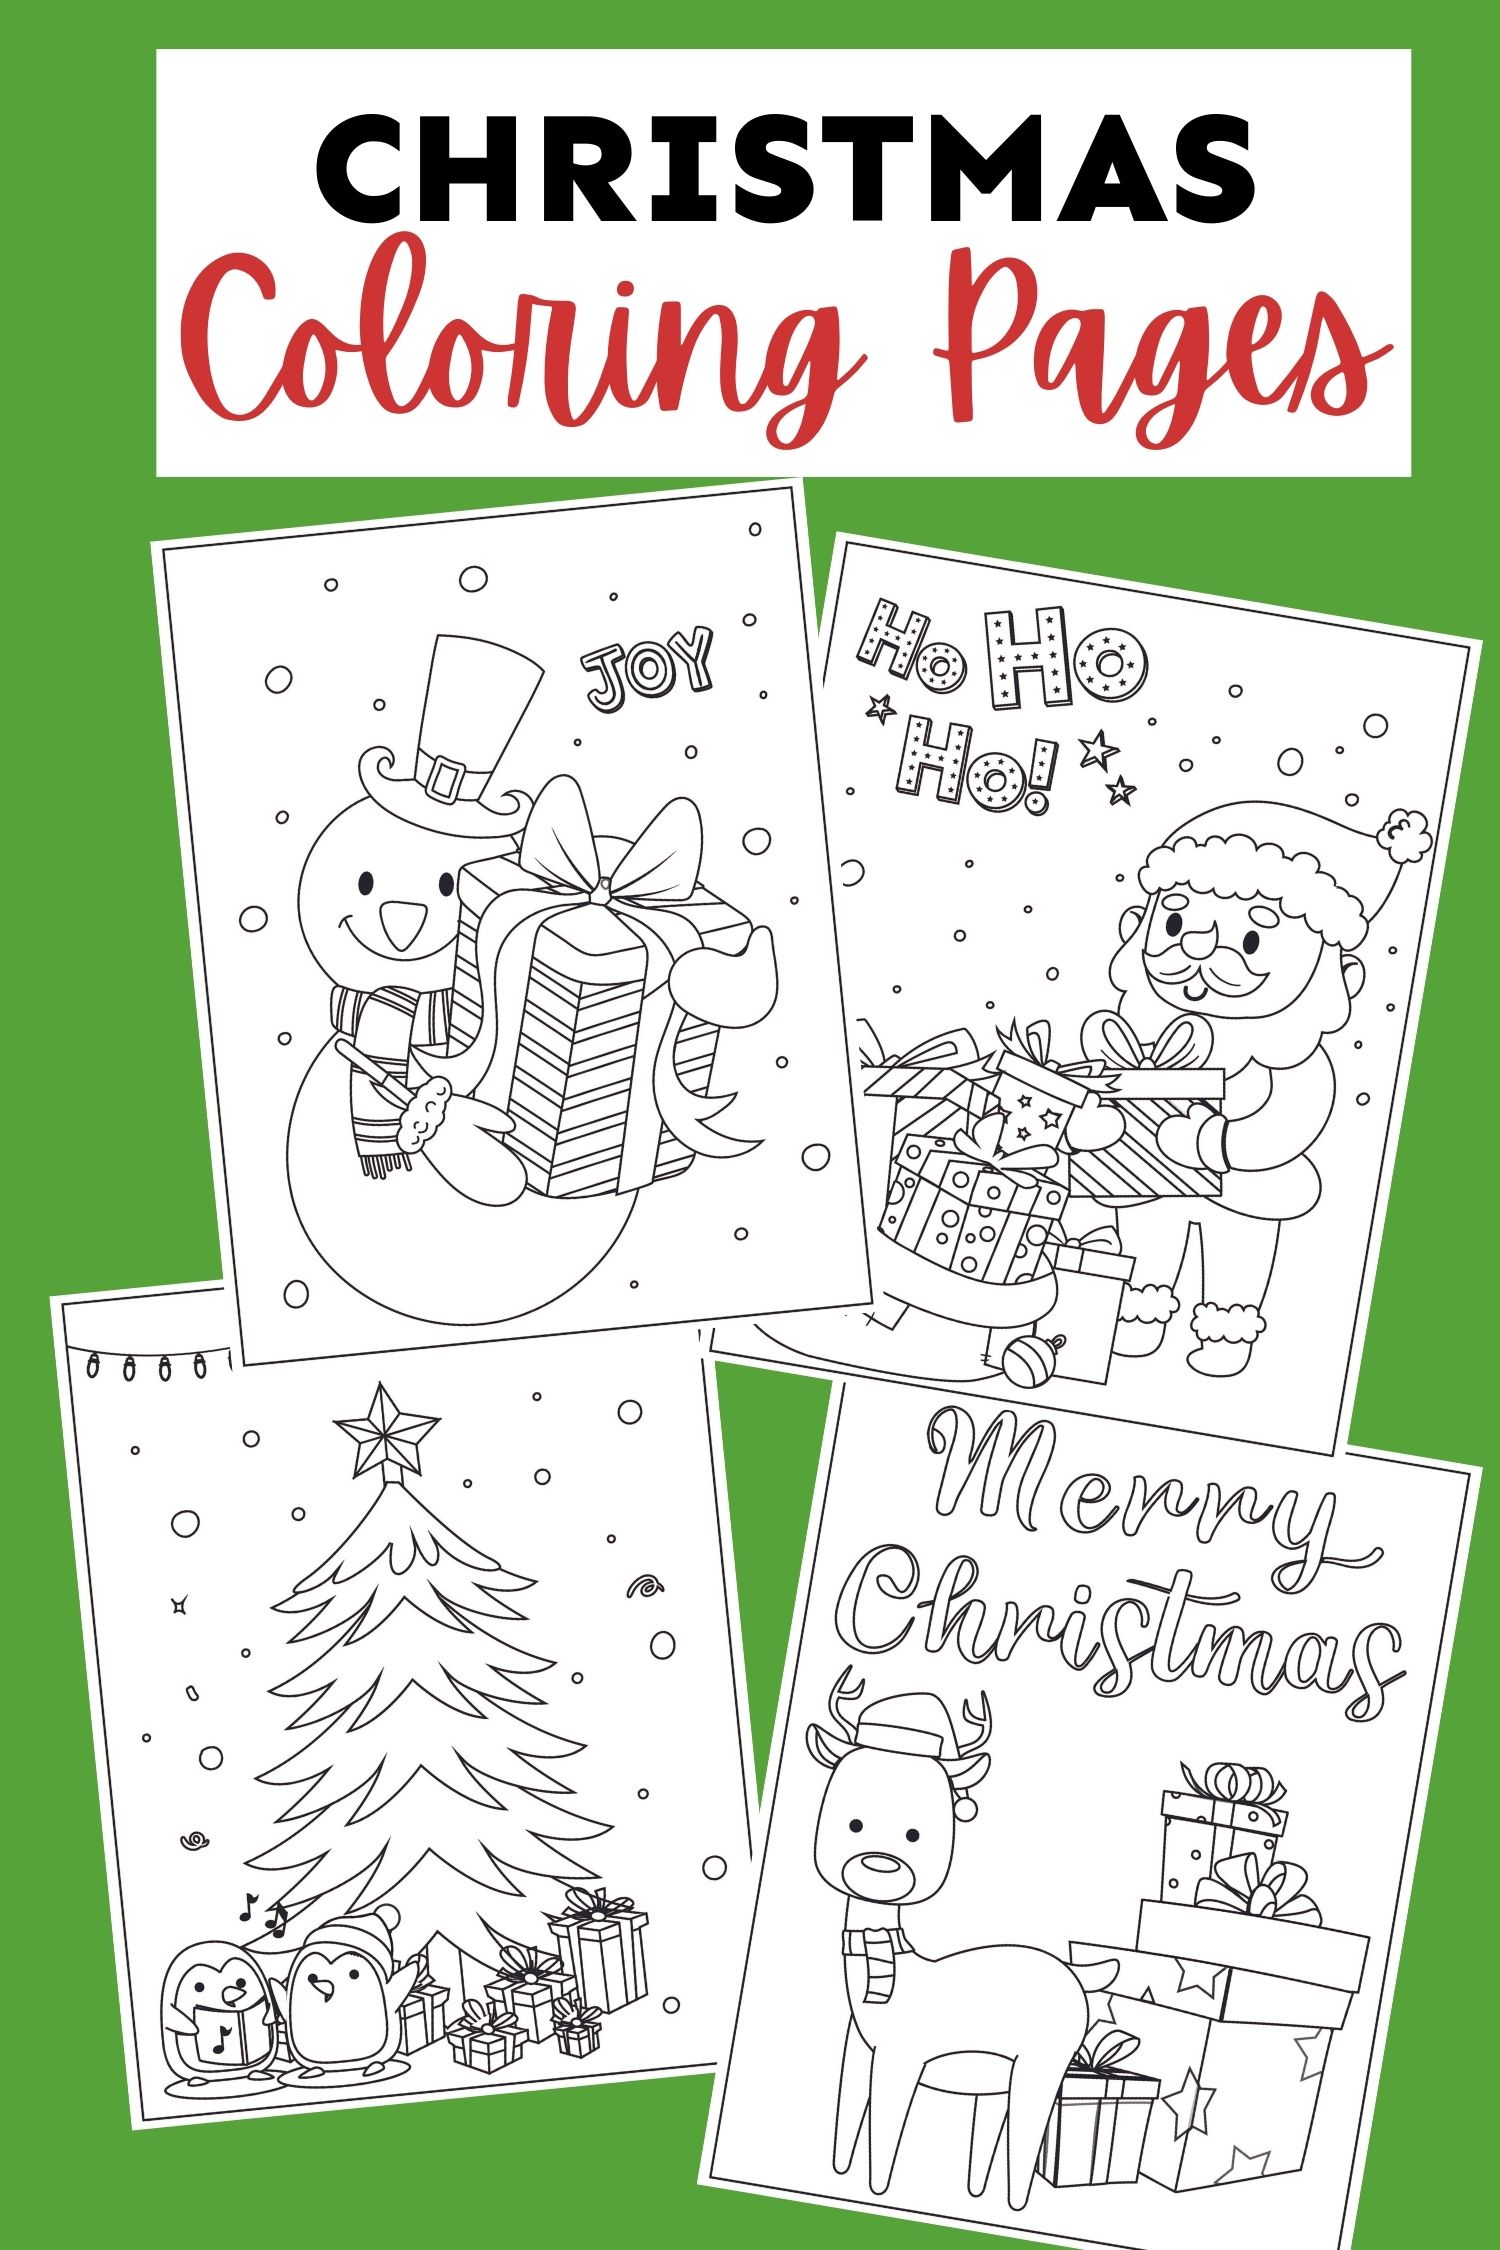 Christmas Coloring Pages - Featured Image